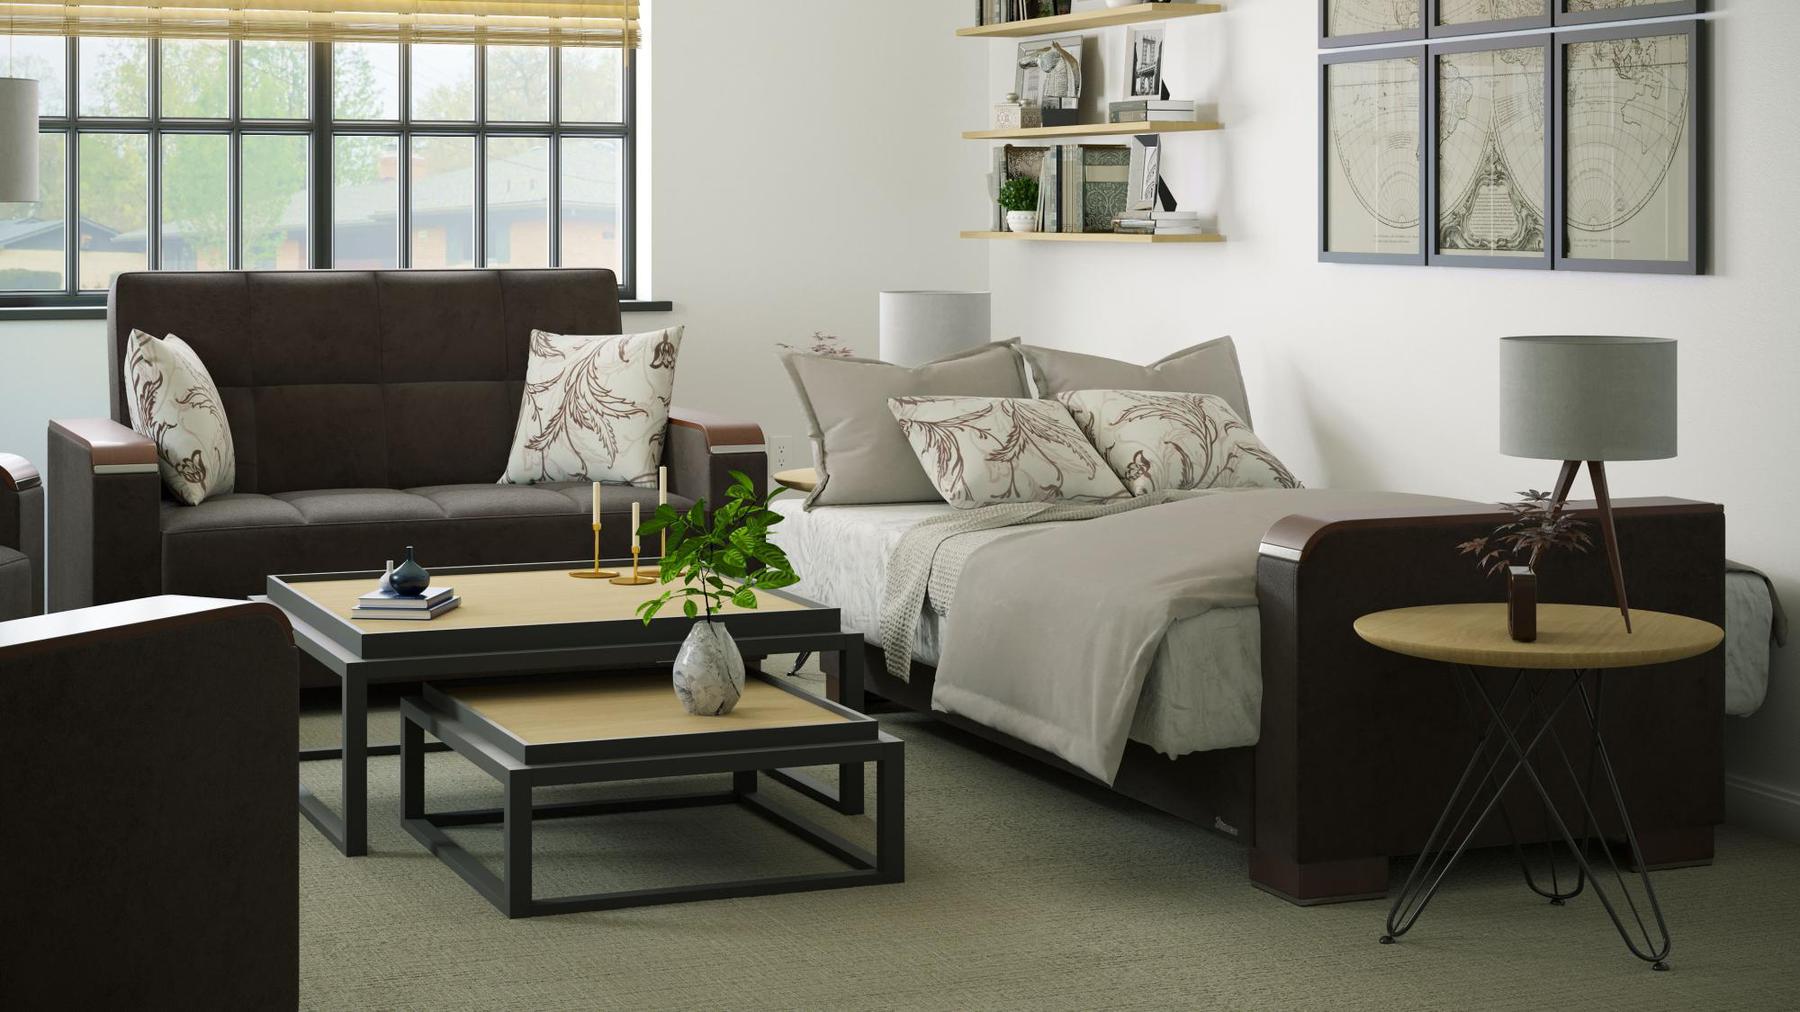 Modern design, Friar Brown , Microfiber  upholstered convertible sleeper Loveseat with underseat storage from Voyage Luxe by Ottomanson in living room lifestyle setting converted to sleeper. This Loveseat measures 67 inches width by 36 inches depth by 41 inches height.